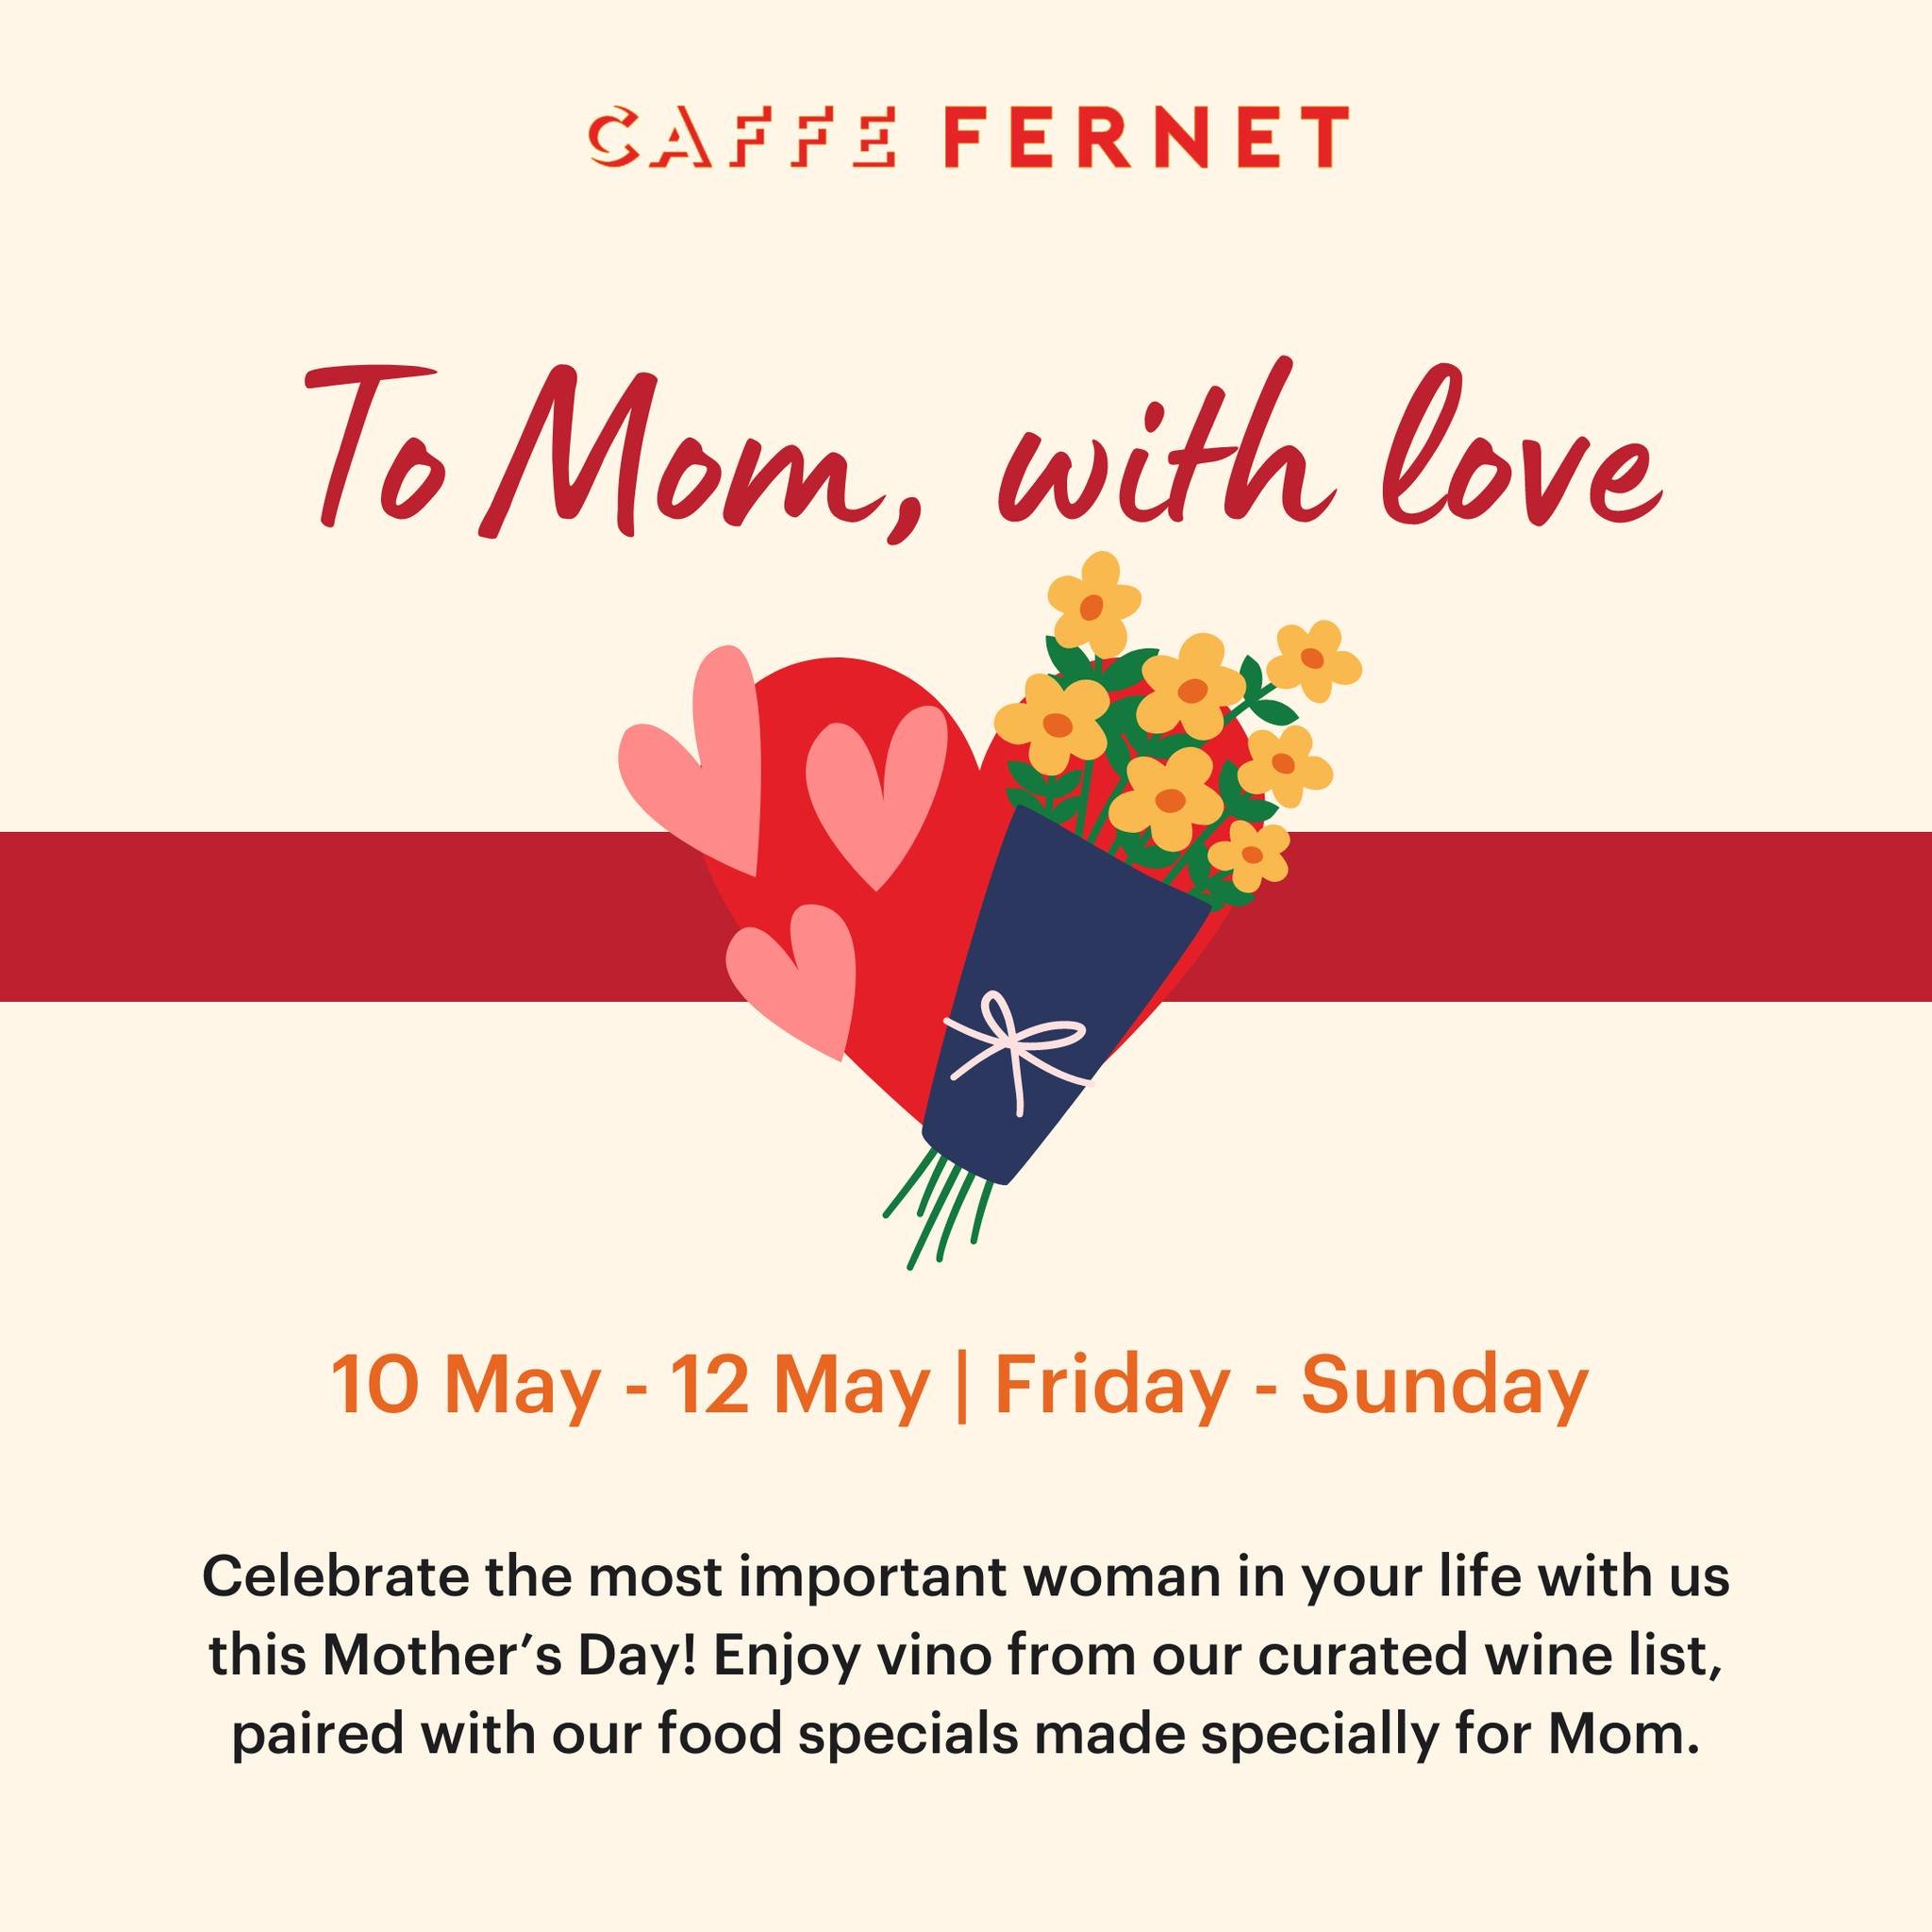 Celebrate the most important woman in your life at Caffe Fernet! From 10 to 12 May, pamper Mom with delicious food and tasty vino - and a glorious view of Singapore's cityscape.

Indulge her with specials from Caffe Fernet's kitchen, including the Ve